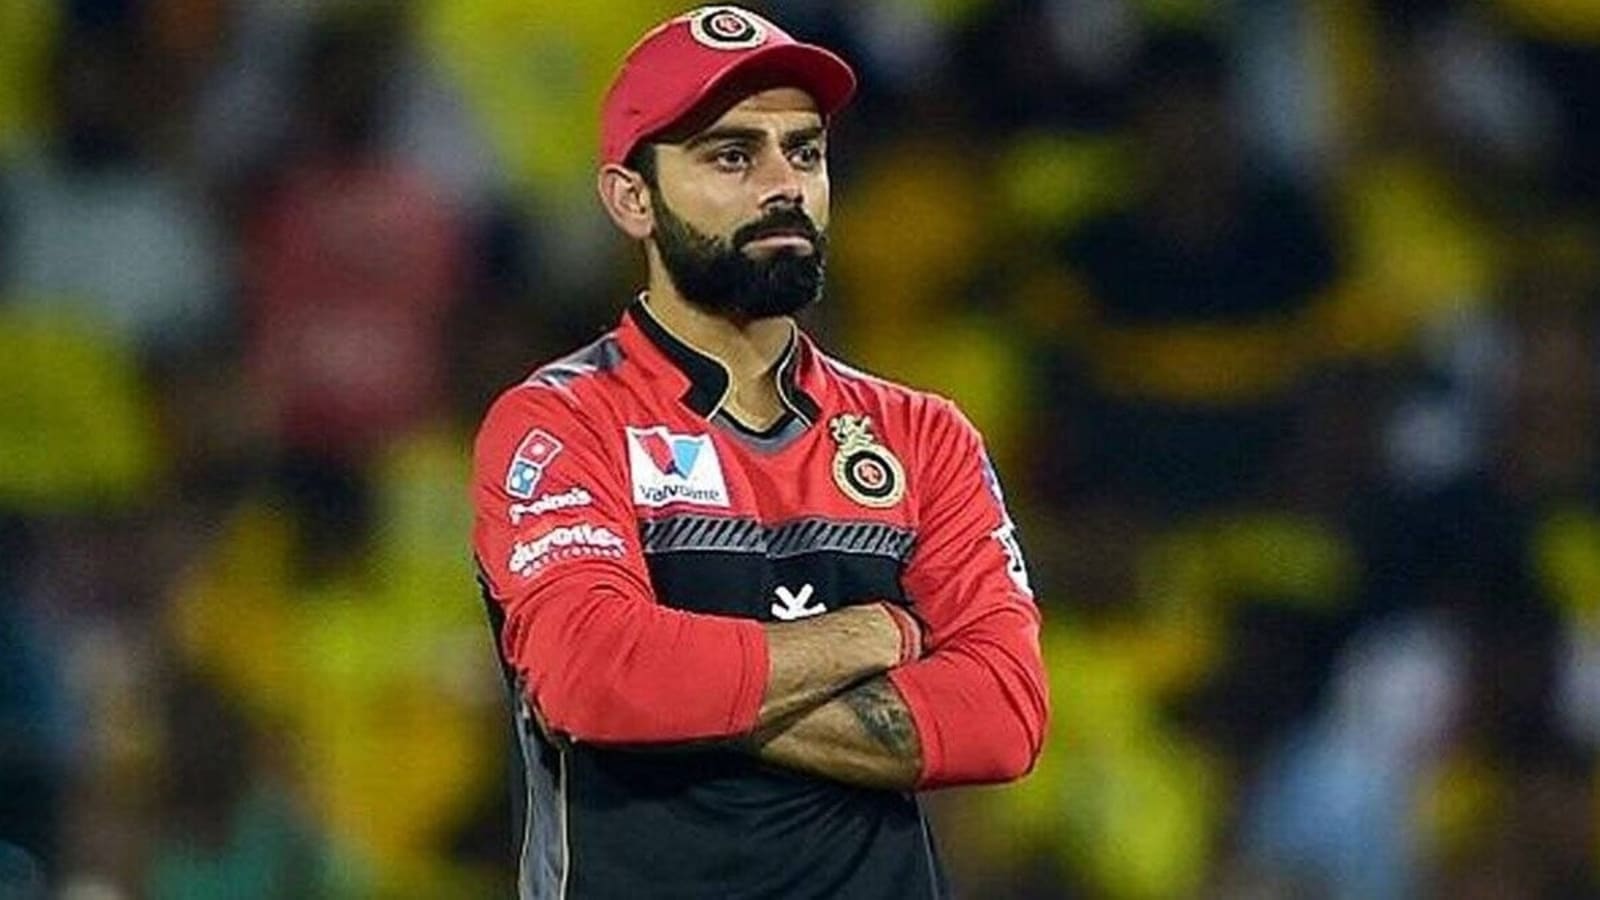 It was Kohli's chance to win IPL as captain. Bowling one bad over ...